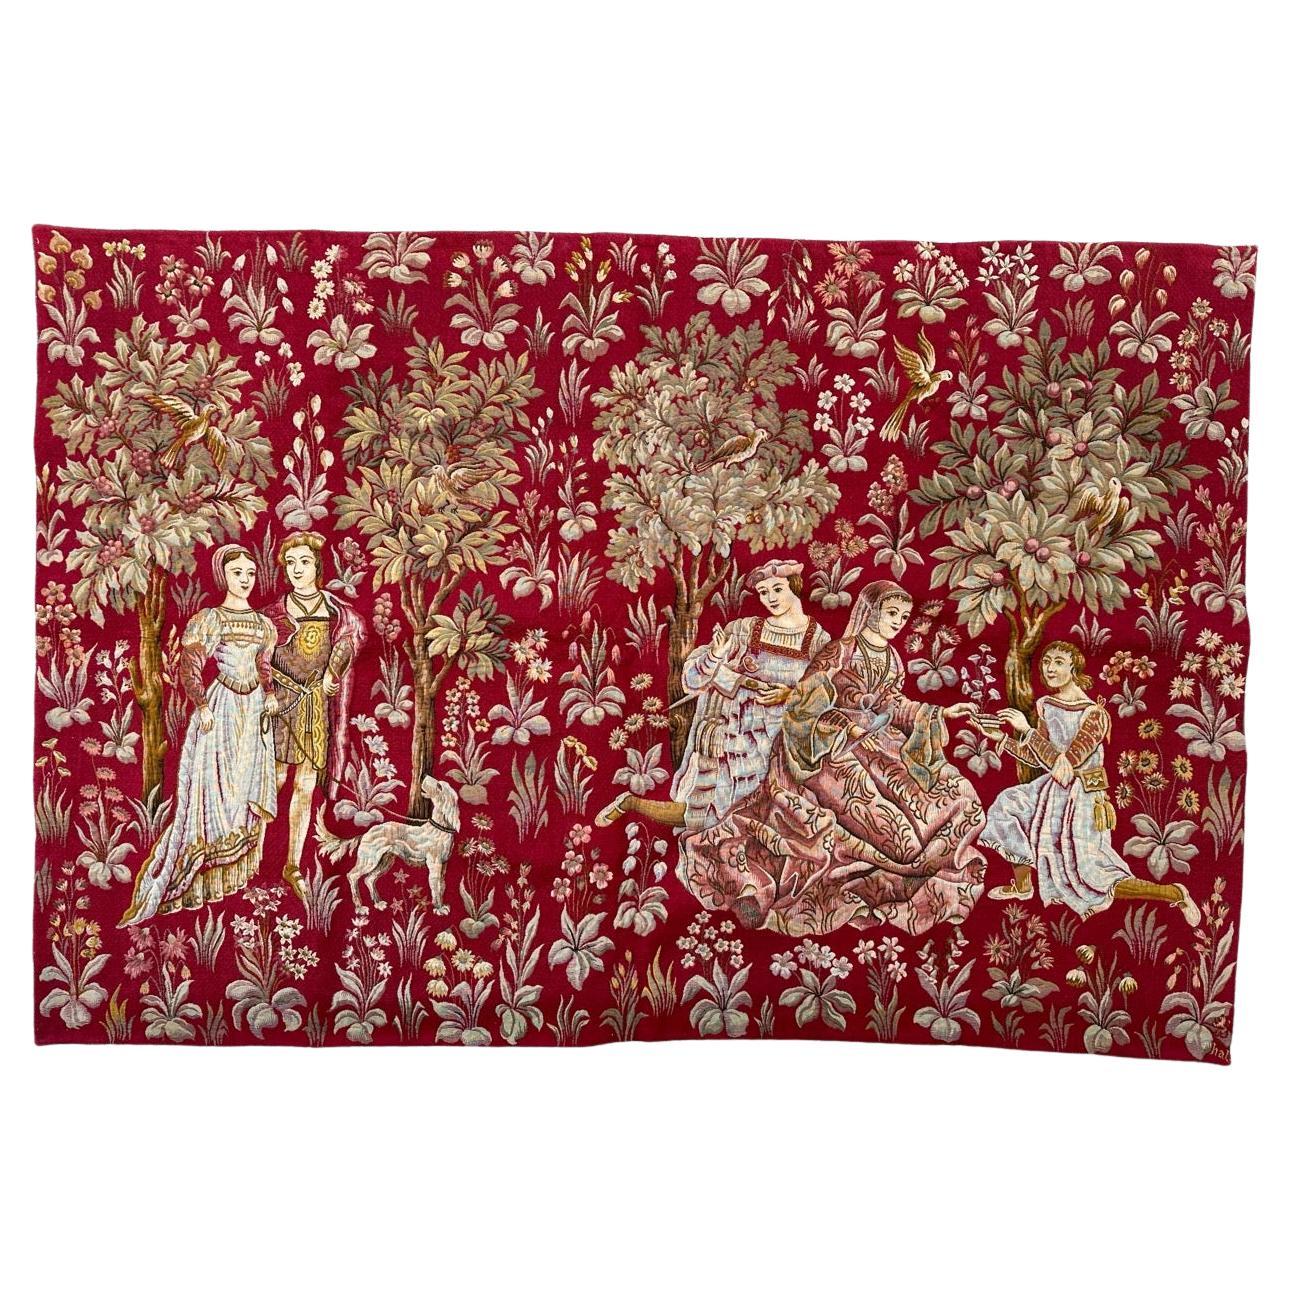 Bobyrug’s Pretty Jaquar Tapestry Aubusson Museum Style Medieval Design For Sale